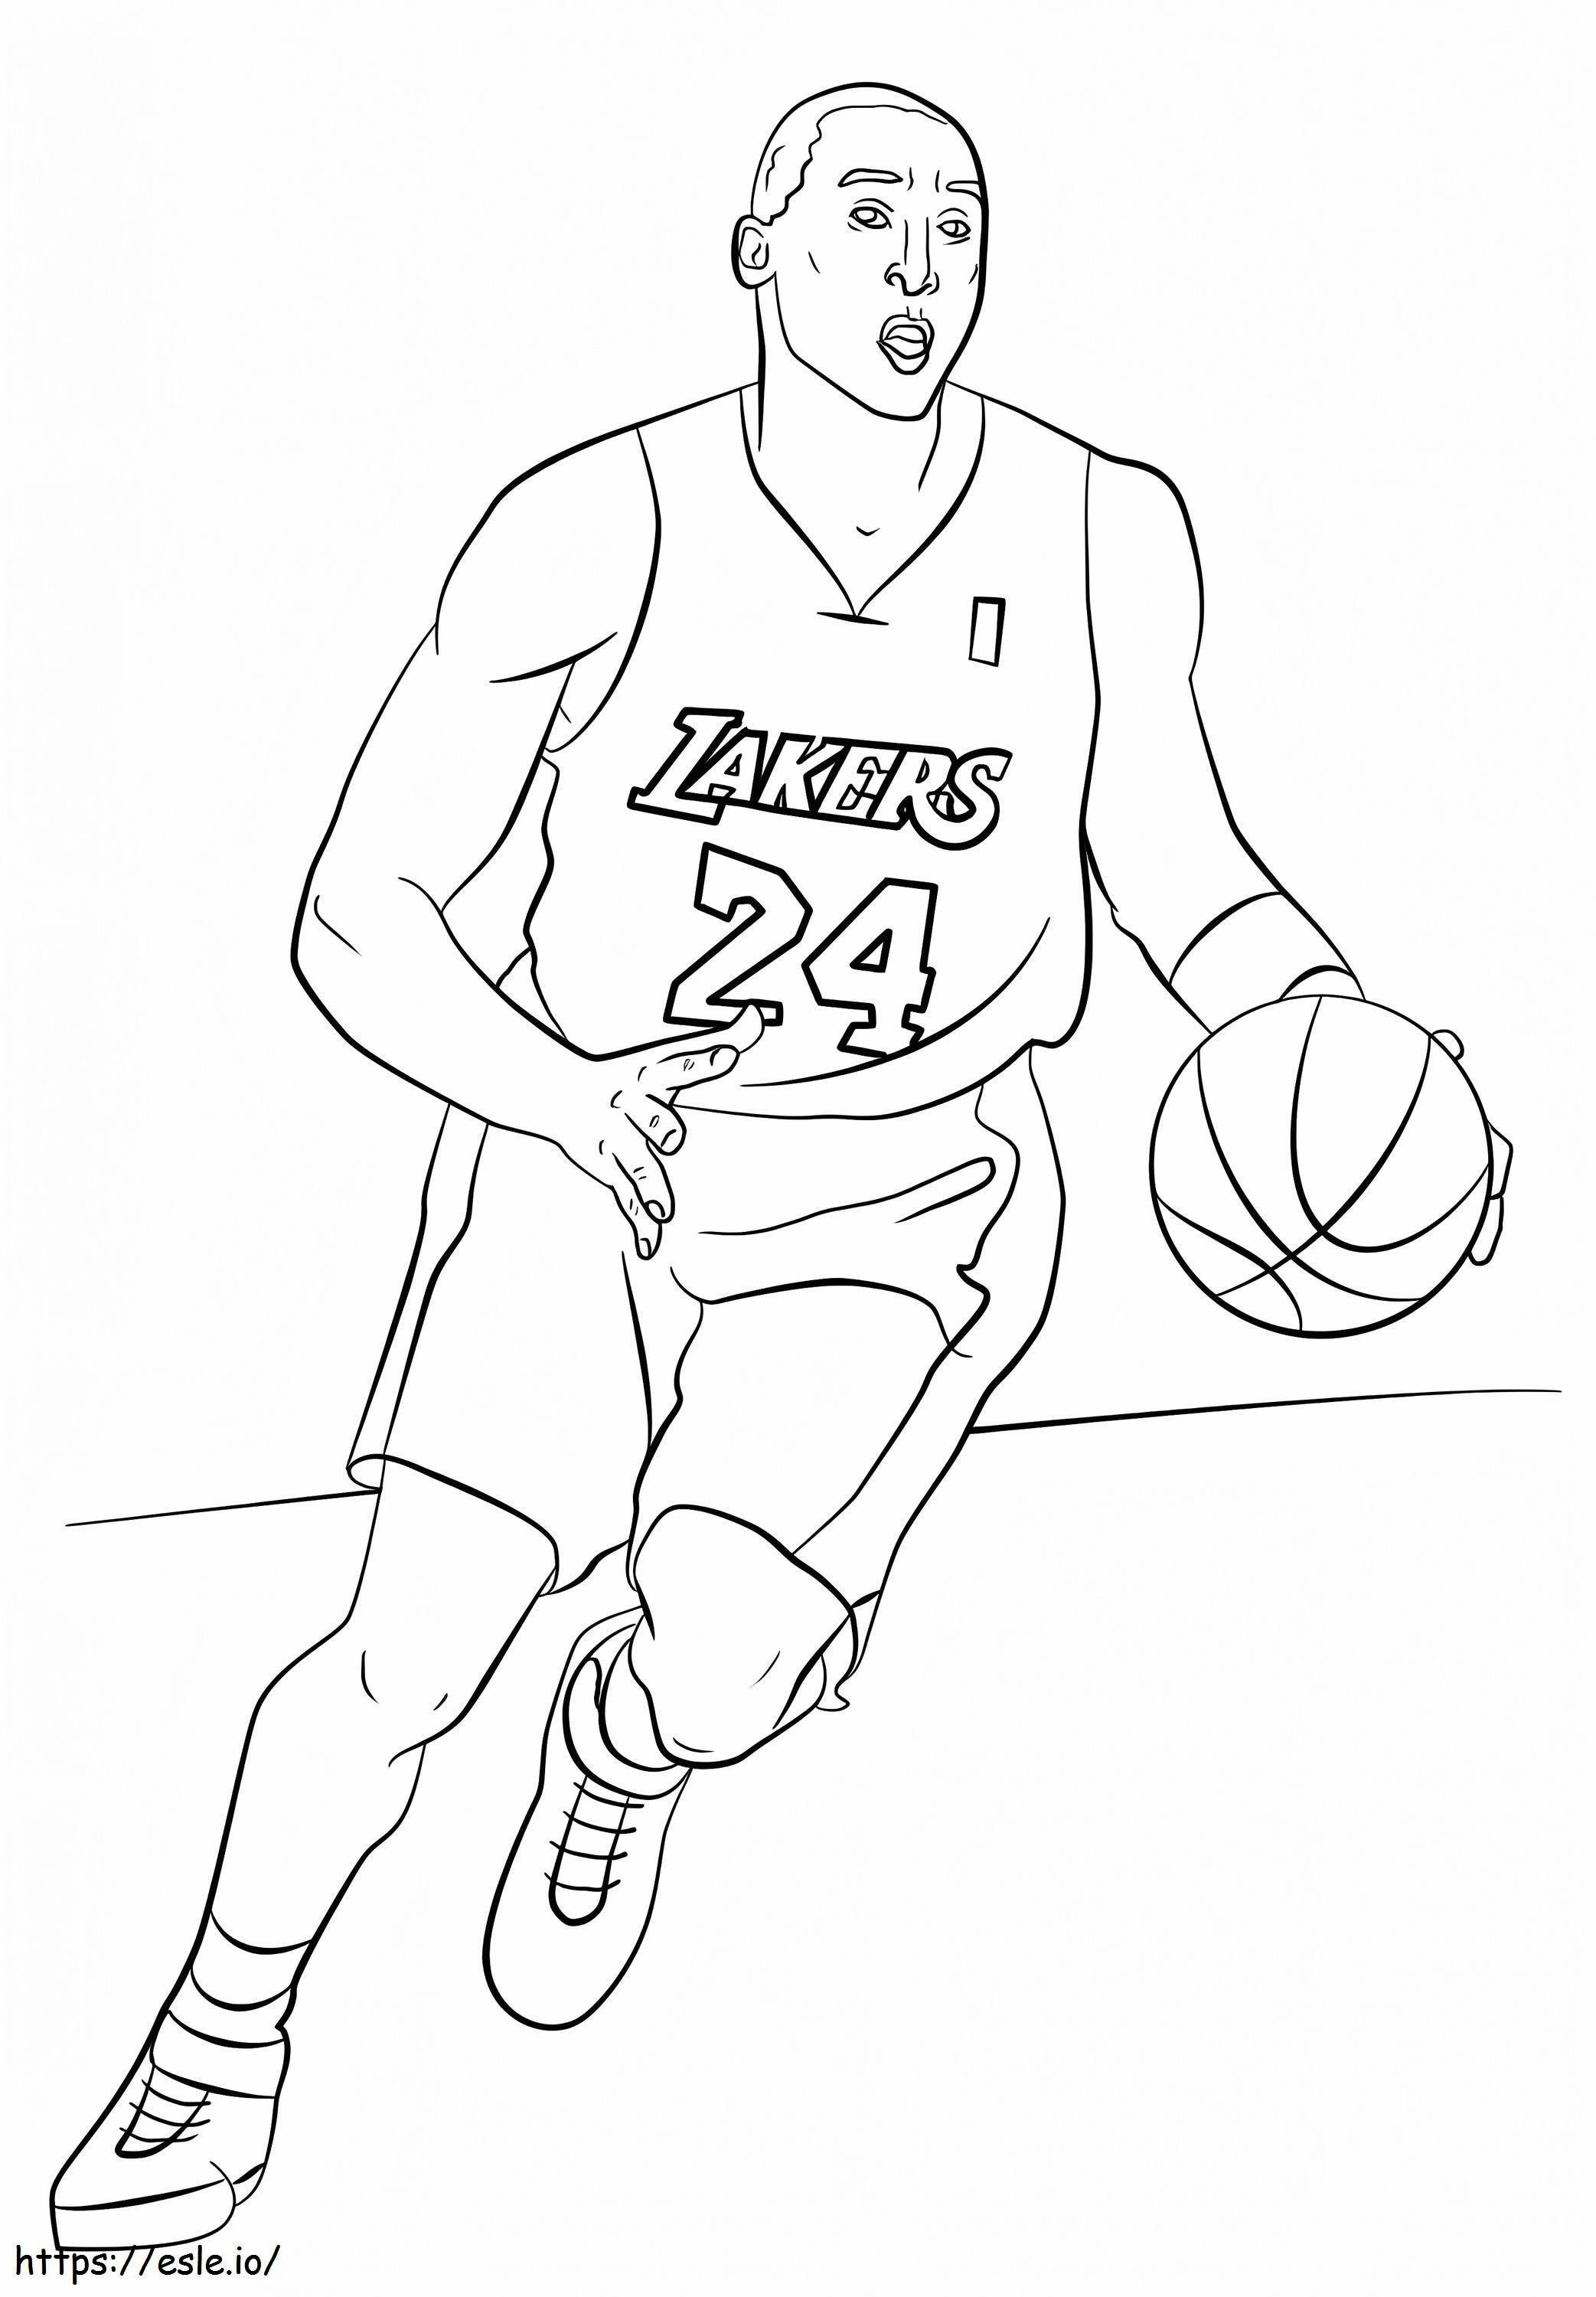 Cool Kobe Bryant coloring page